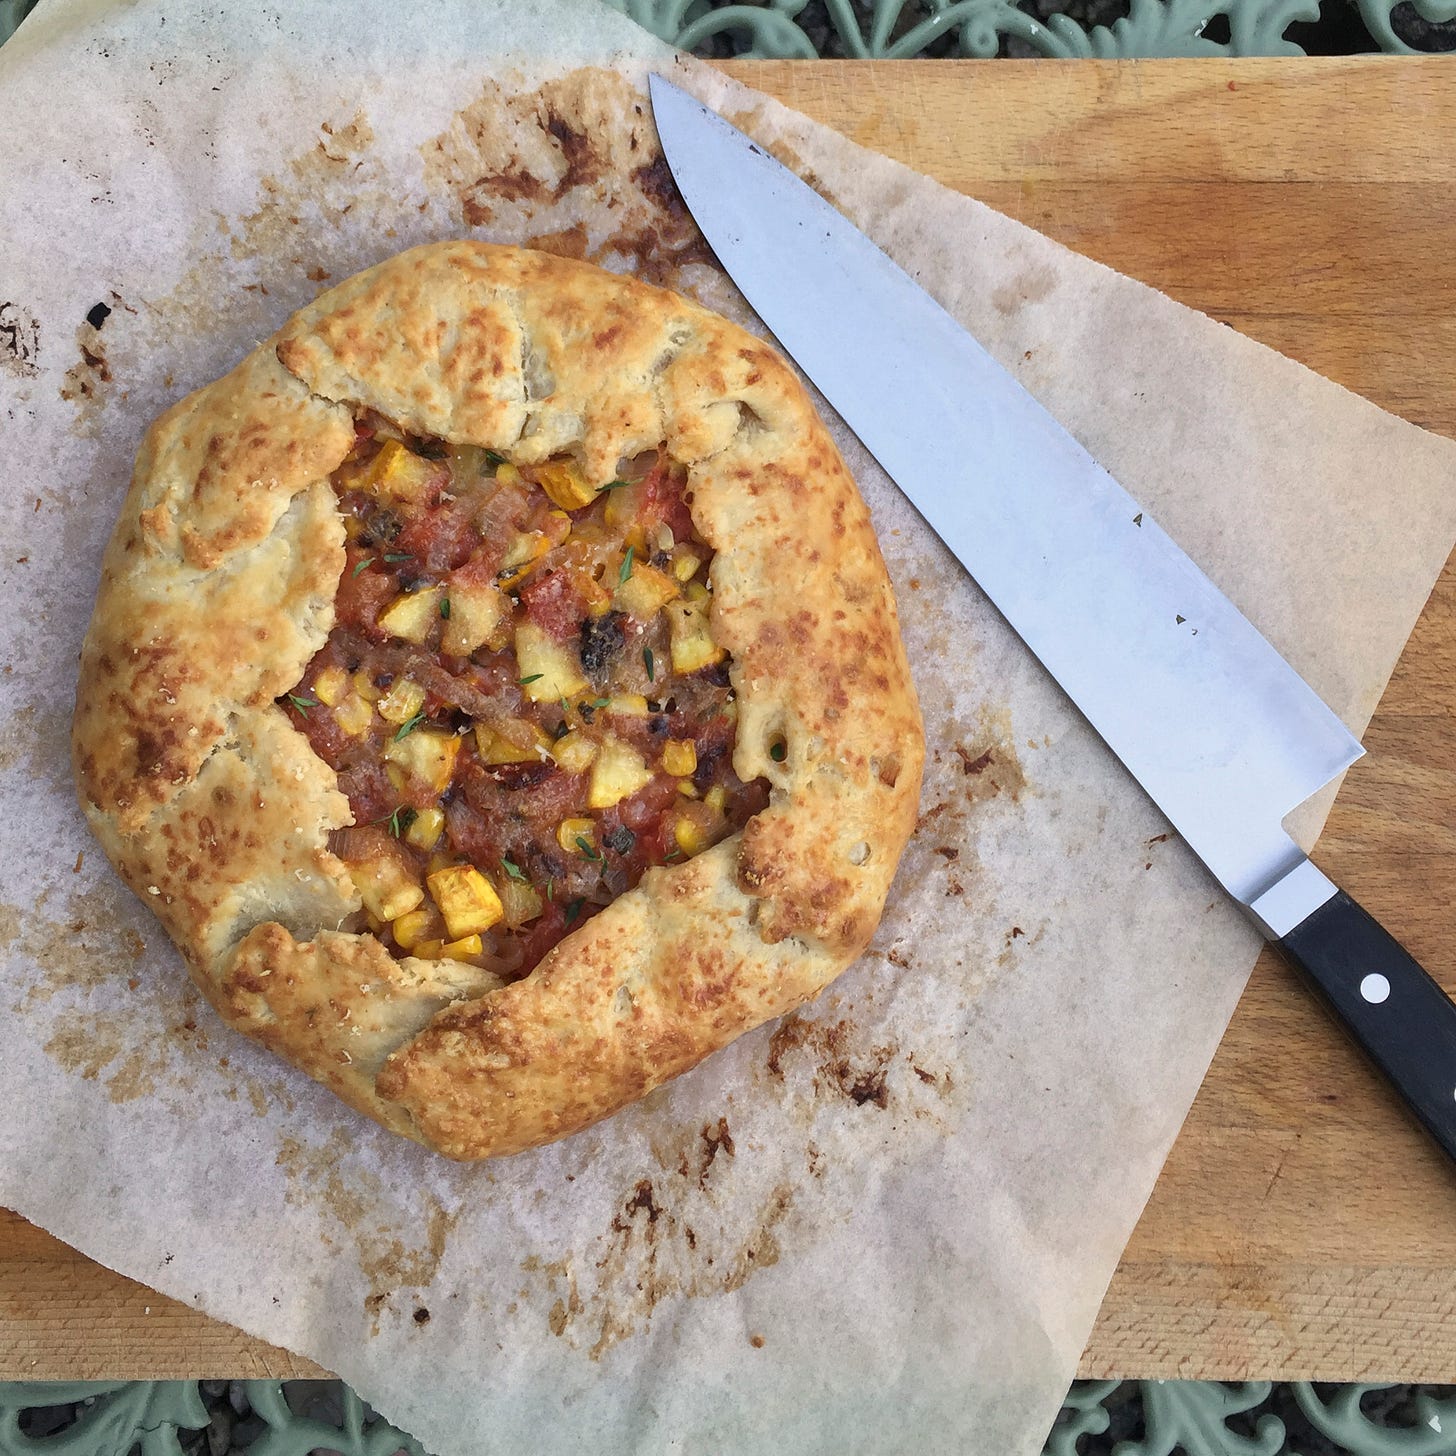 A browned galette filled with tomatoes, corn, and yellow zucchini, sprinkled with thyme. It sits on a piece of parchment, browned from the oven, atop a wooden cutting board. A large chef's knife sits next to it at an angle.